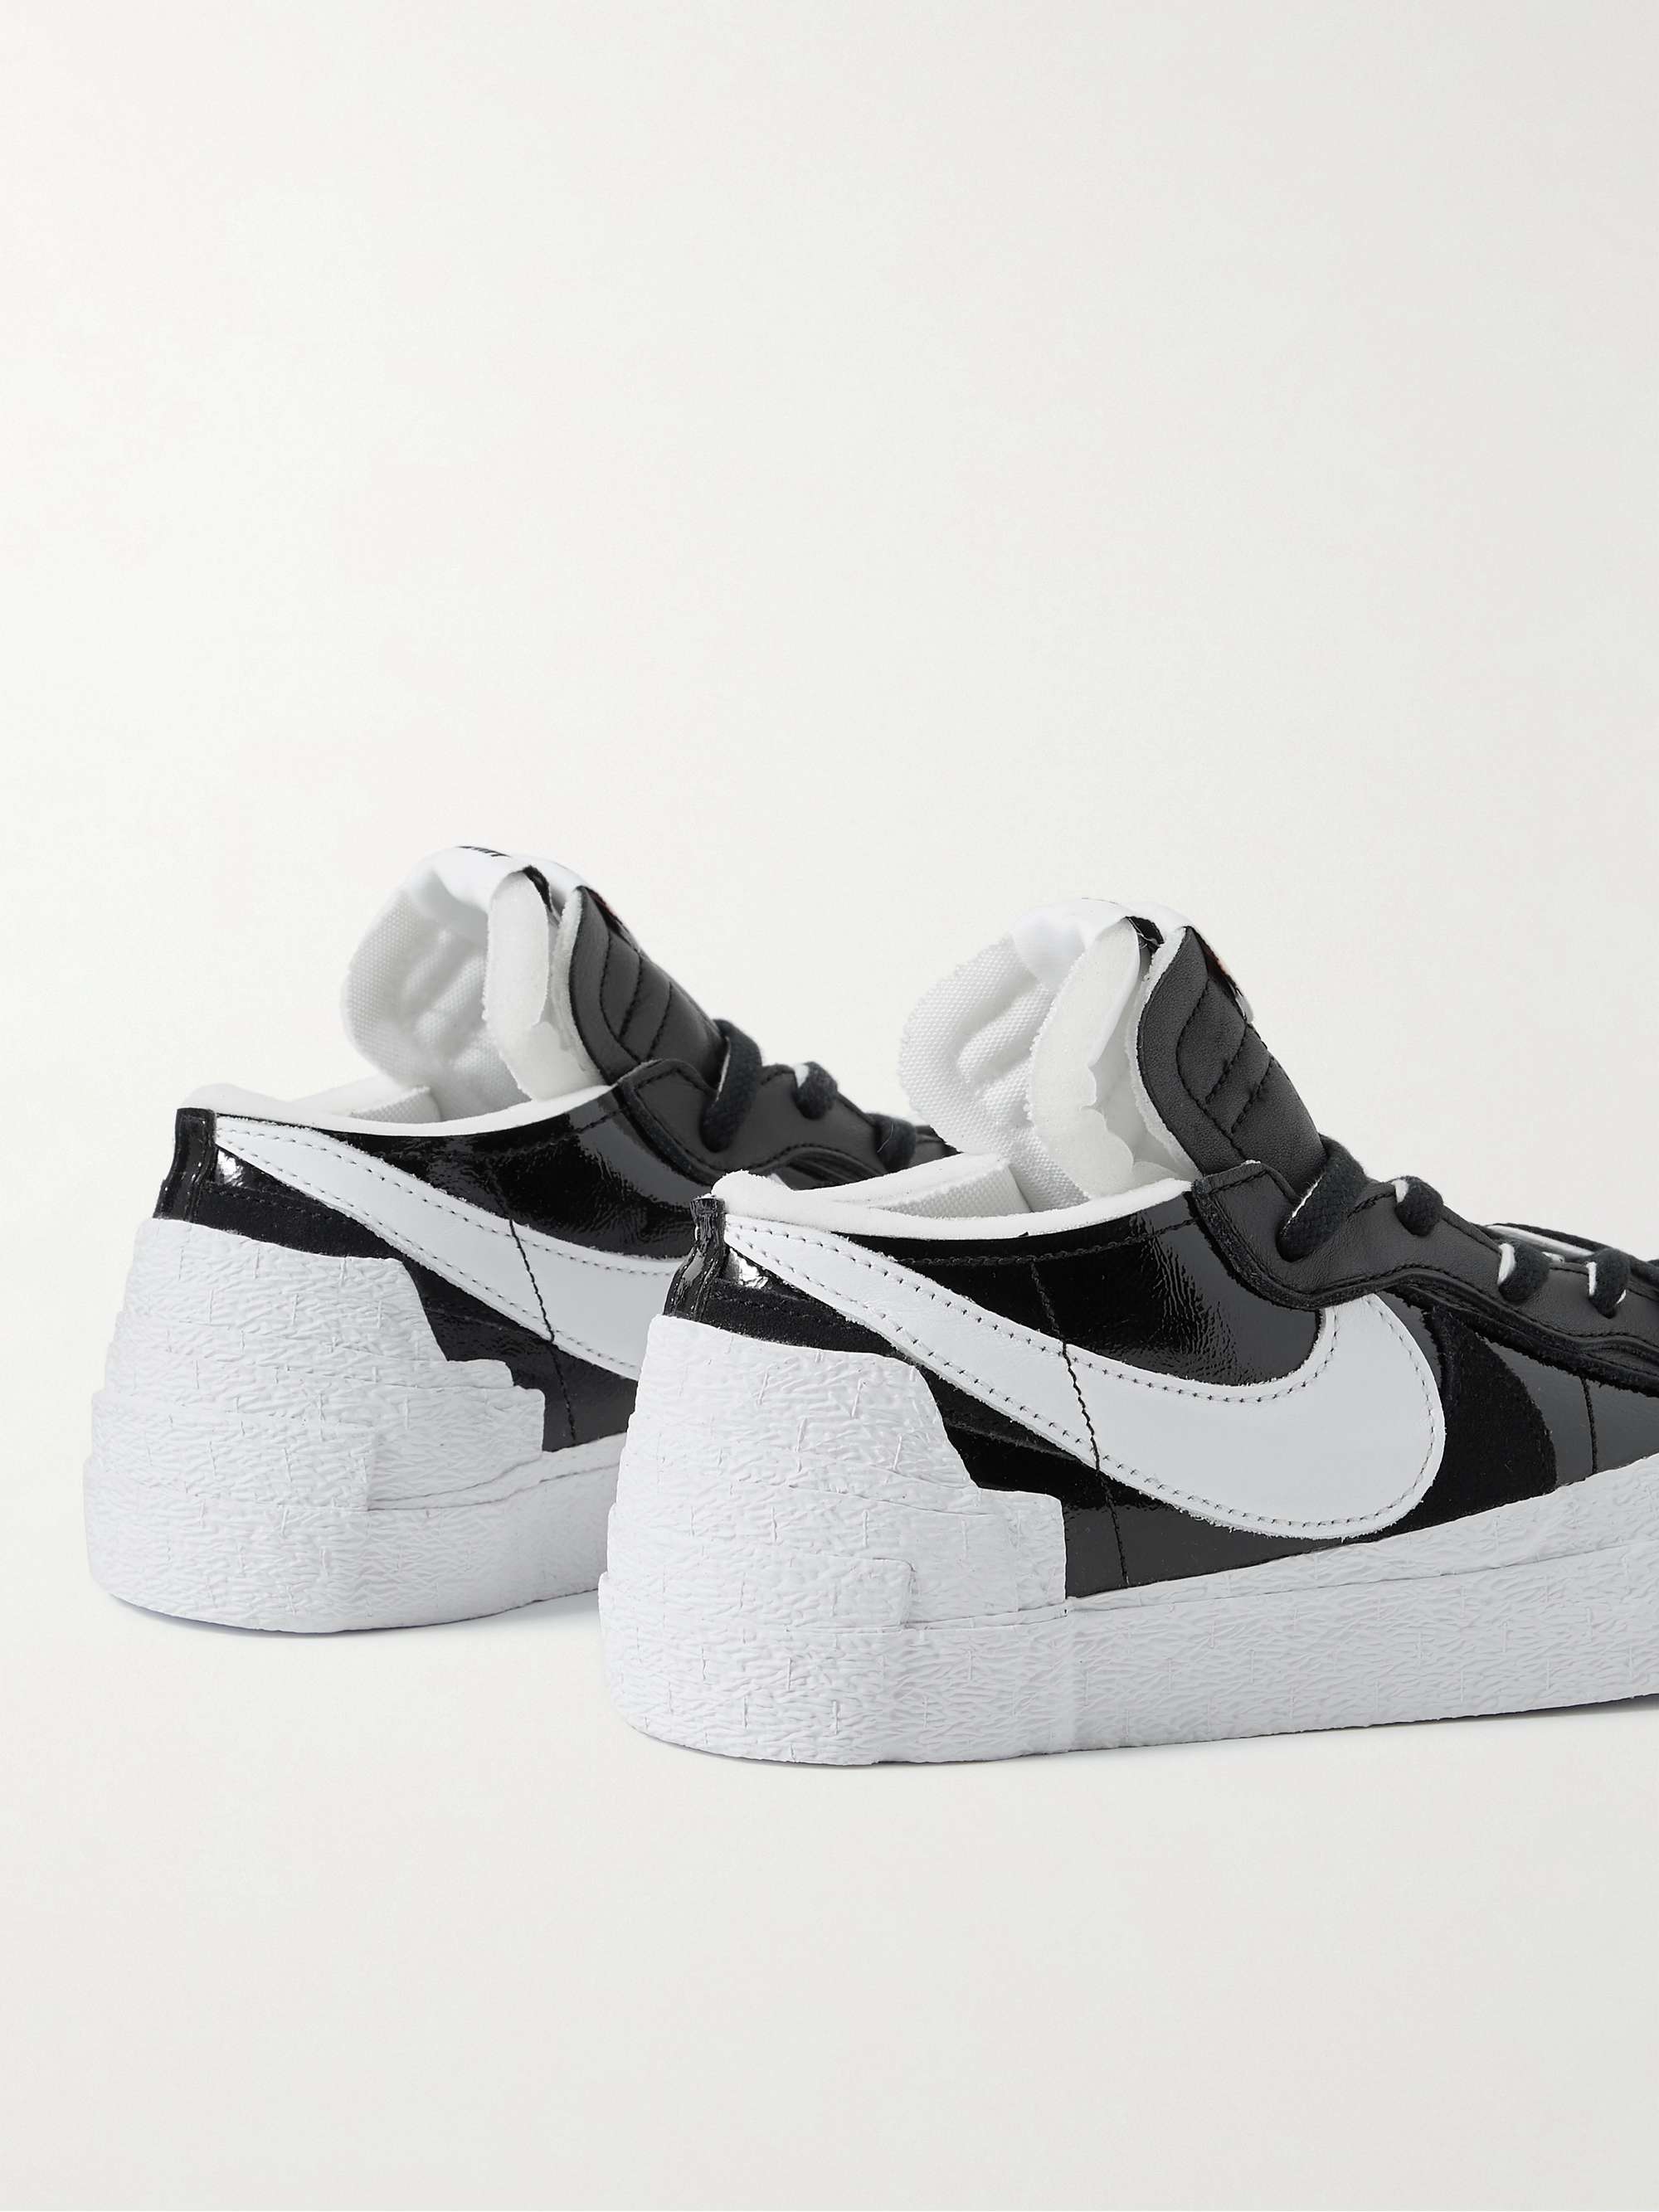 Black + Sacai Blazer Low Suede-Trimmed Leather Sneakers | NIKE | MR PORTER